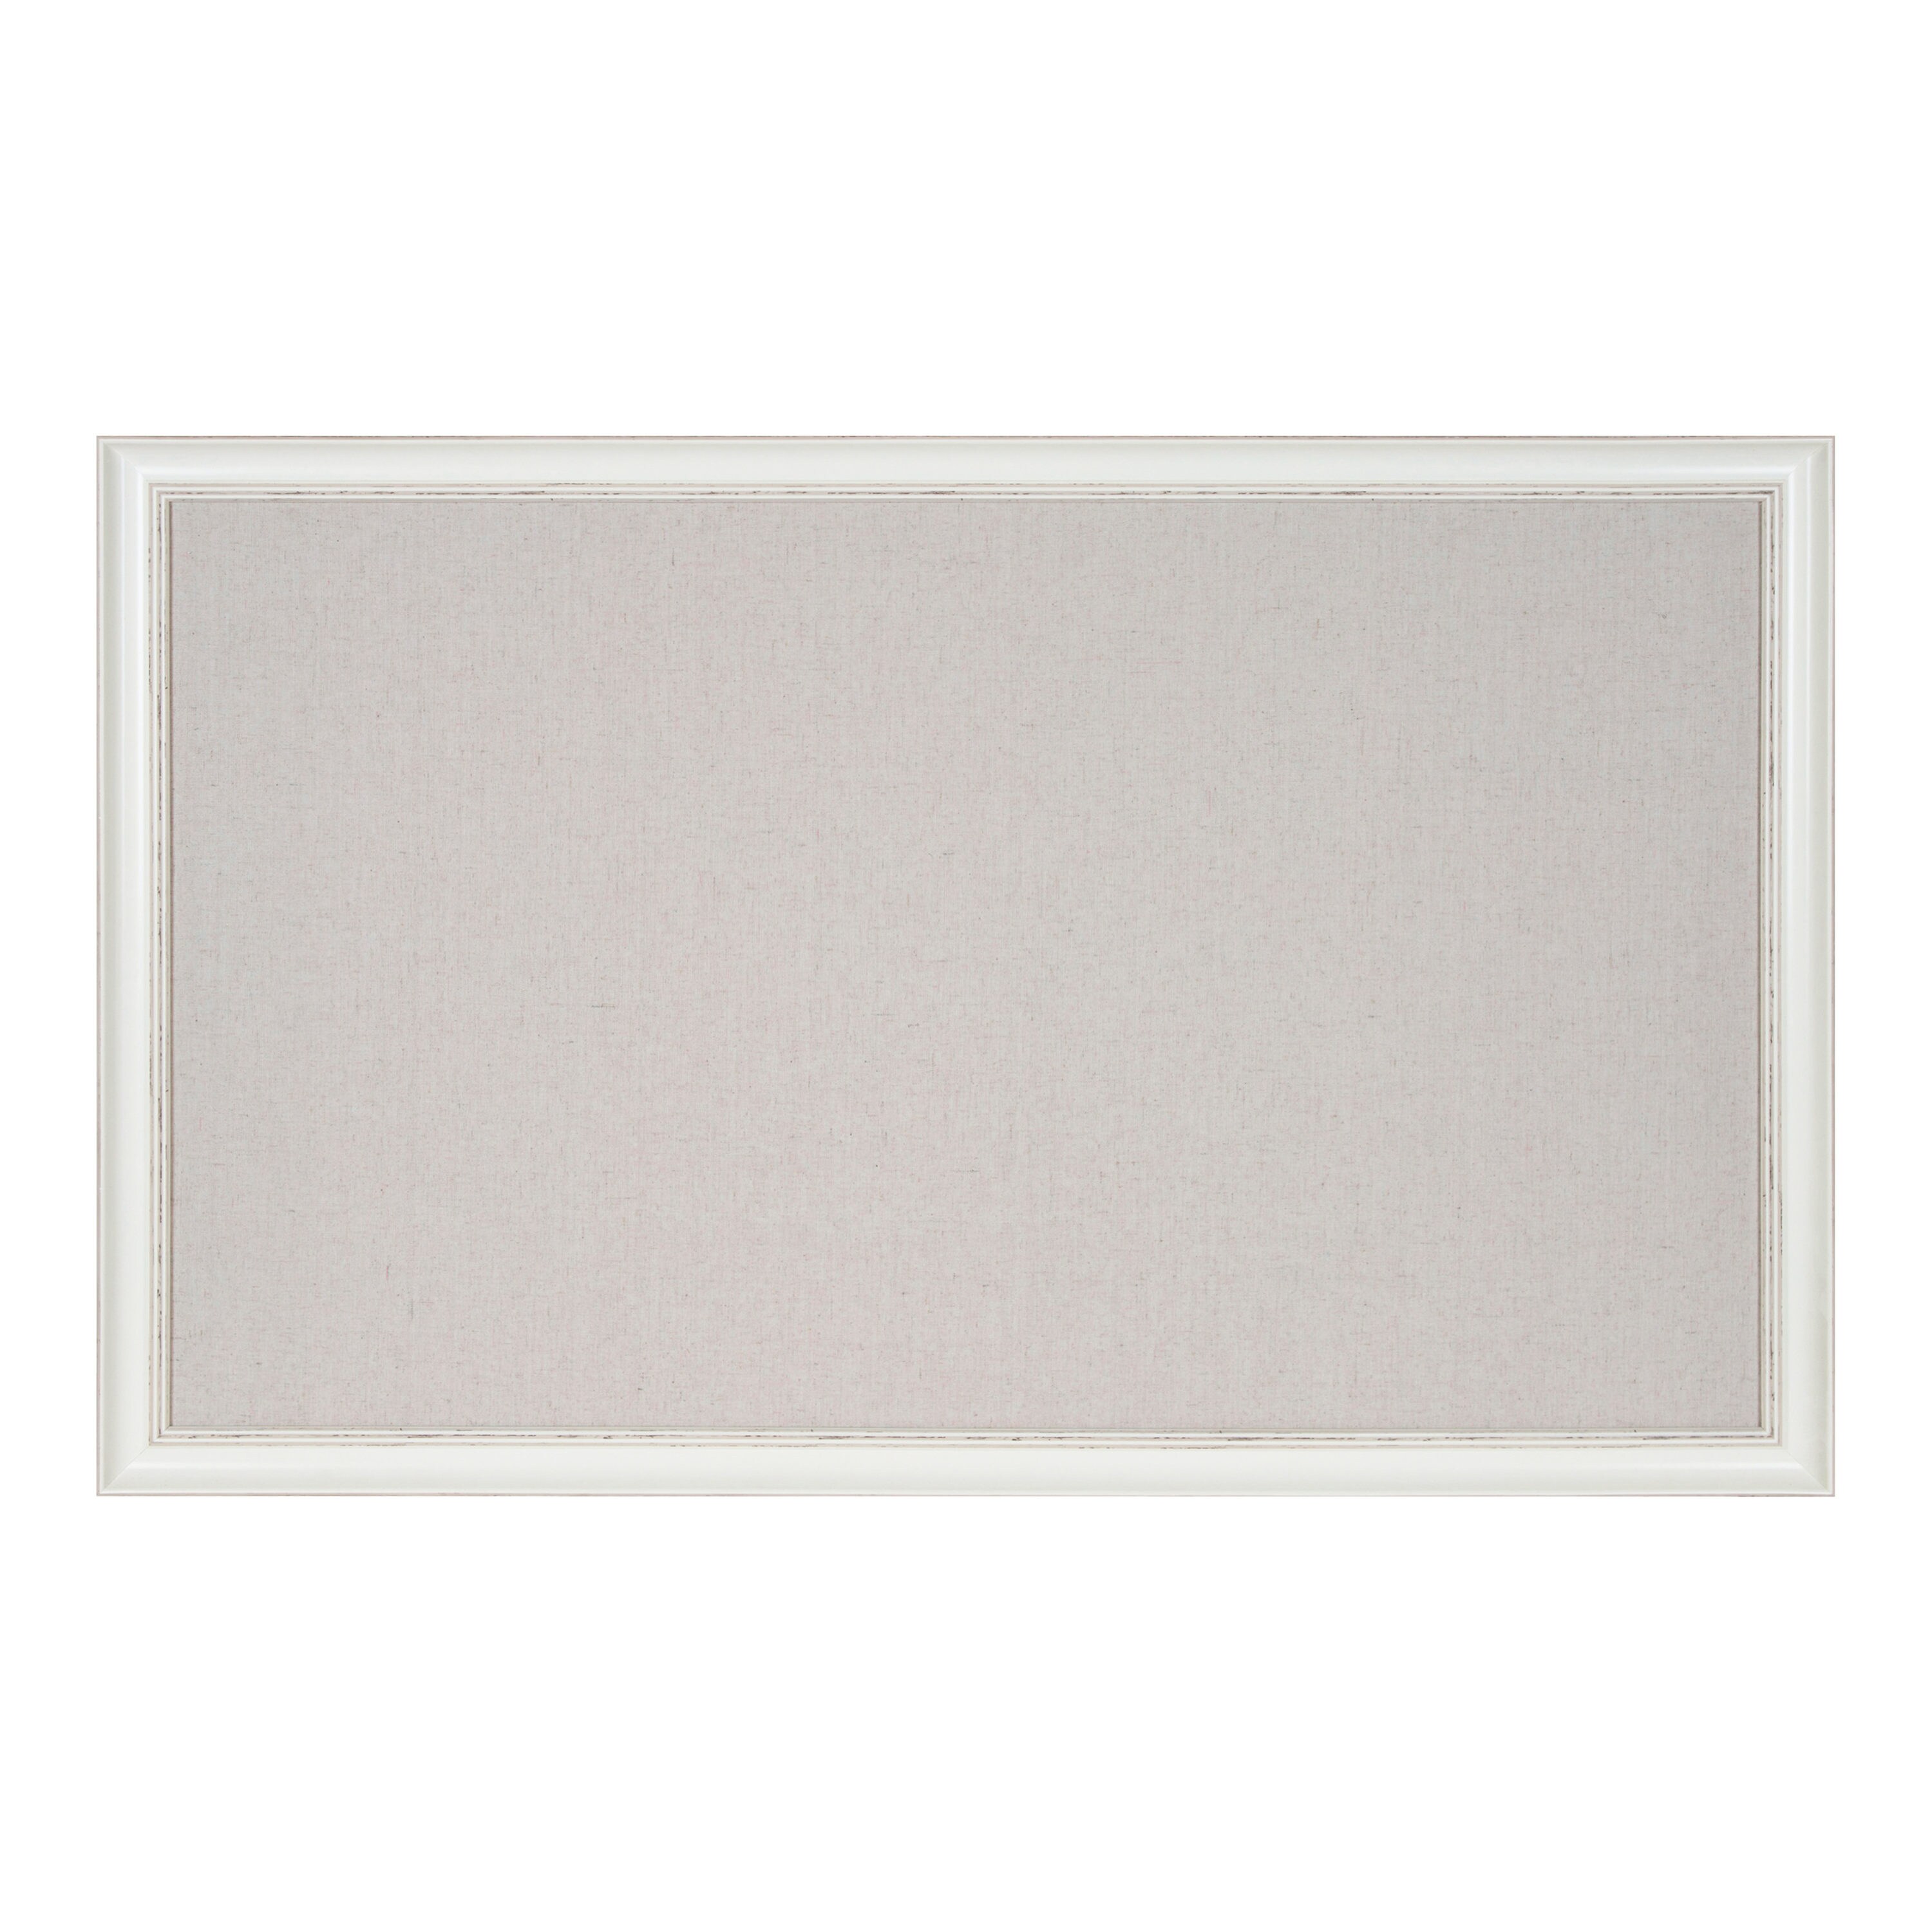 Details about   CORK BOARD MESSAGE NOTICE PIN BOARD WHITE MAGNETIC WOODEN FRAME OFFICE MEMO 